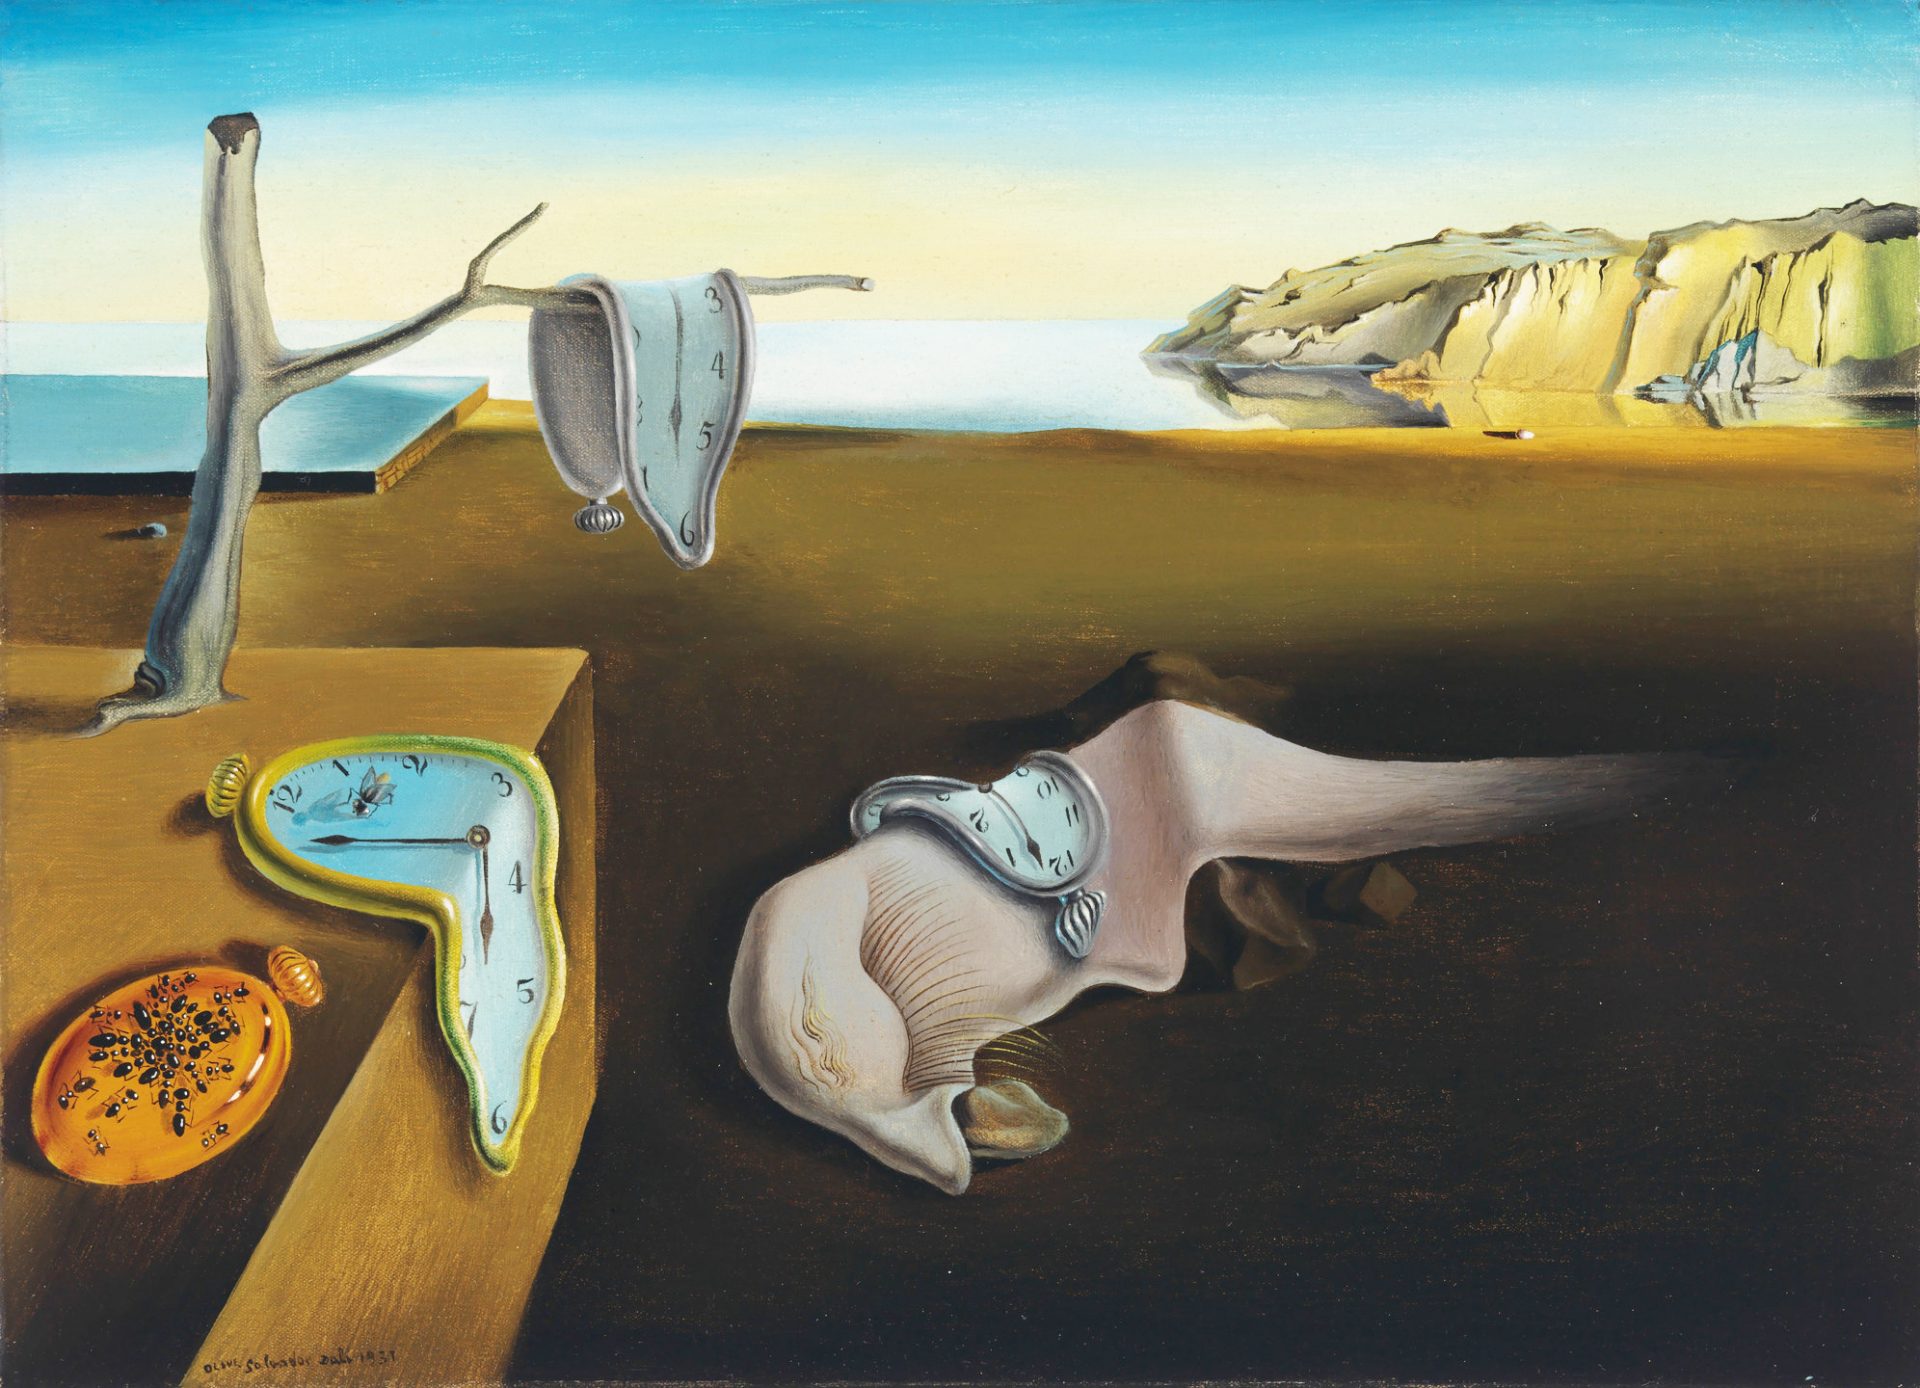 A surreal painting by Salvador Dali showing a dream-like landscape with melting objects that represent the distortion of time.